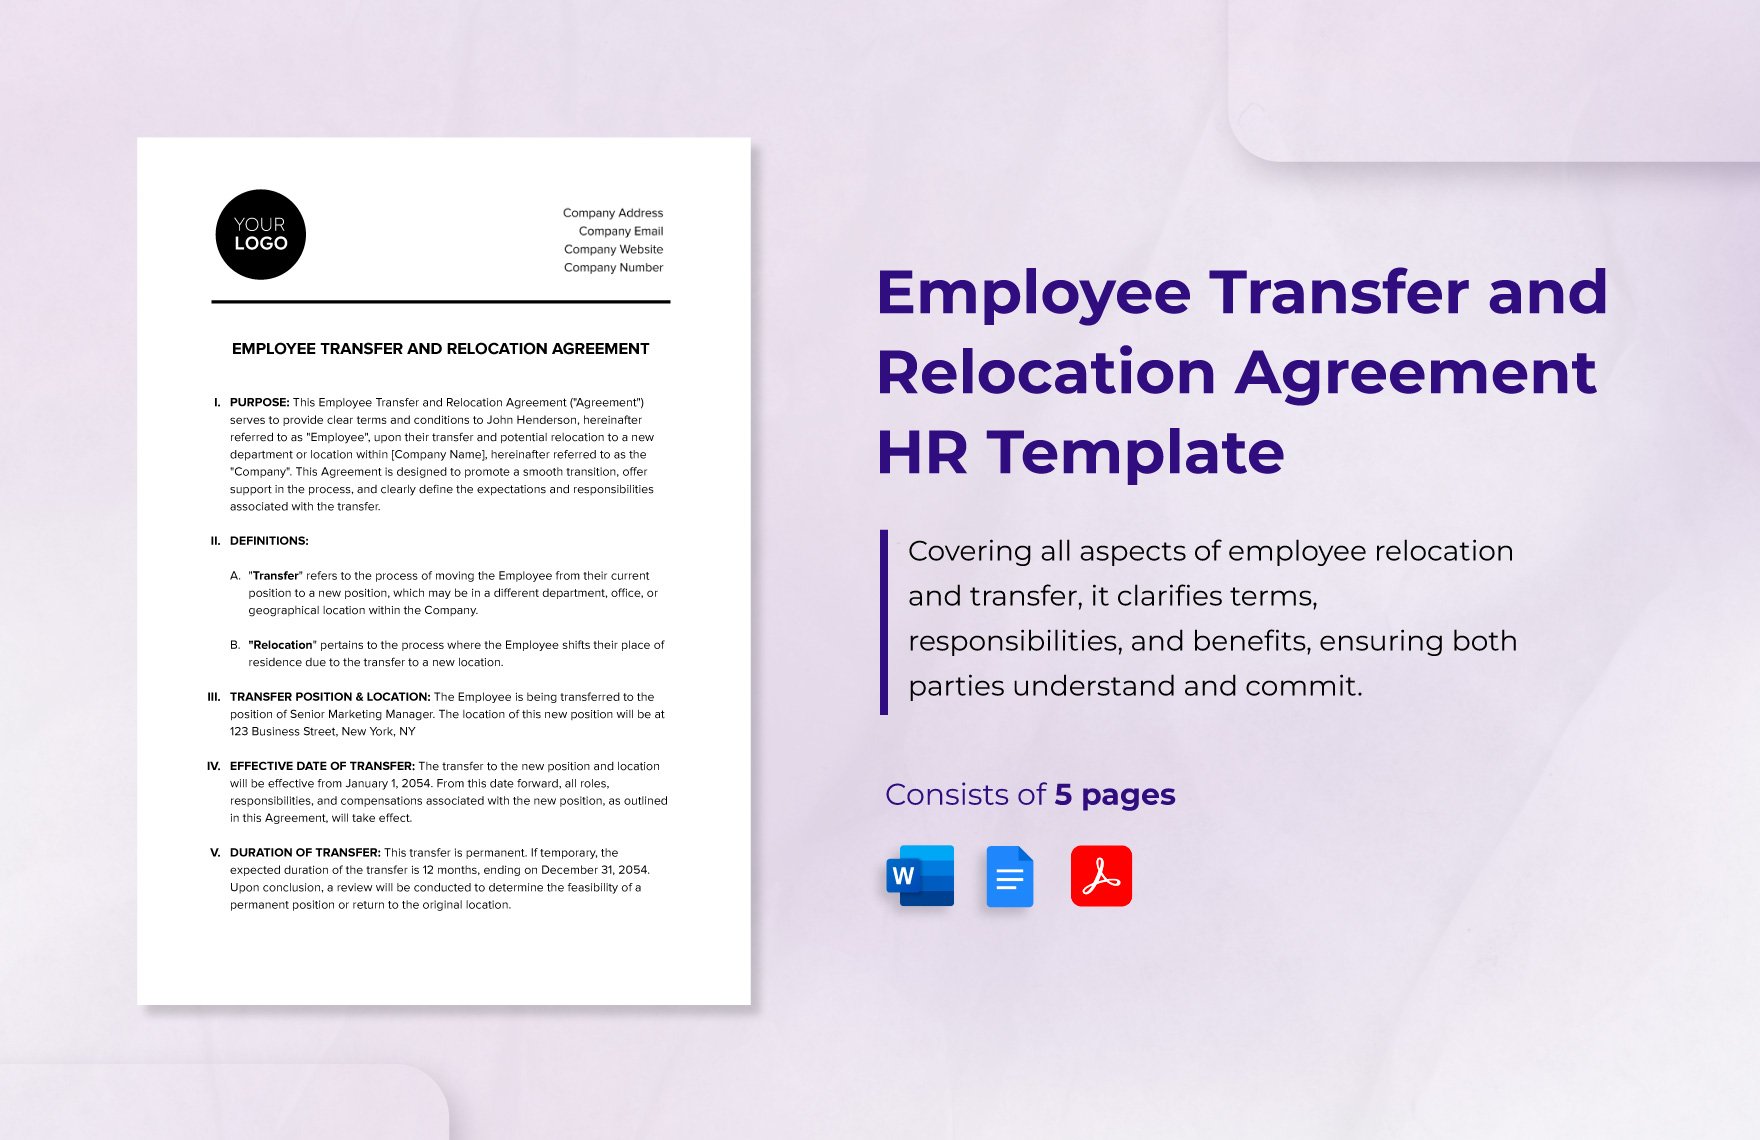 Employee Transfer and Relocation Agreement HR Template